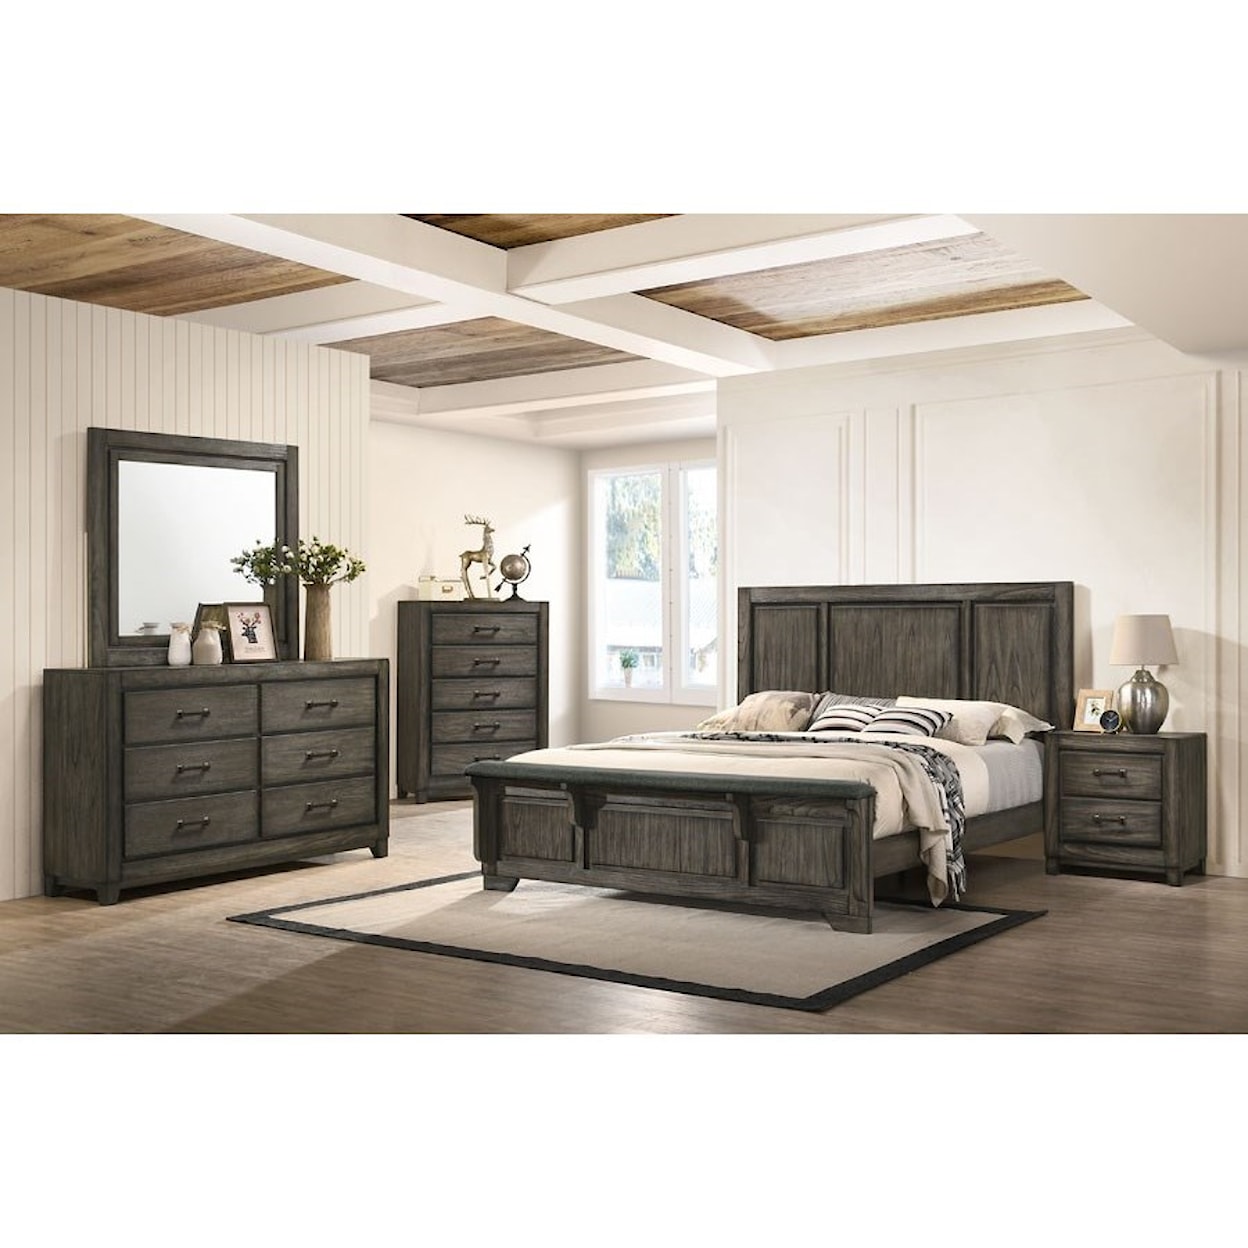 New Classic Furniture Ashland Queen Bedroom Group